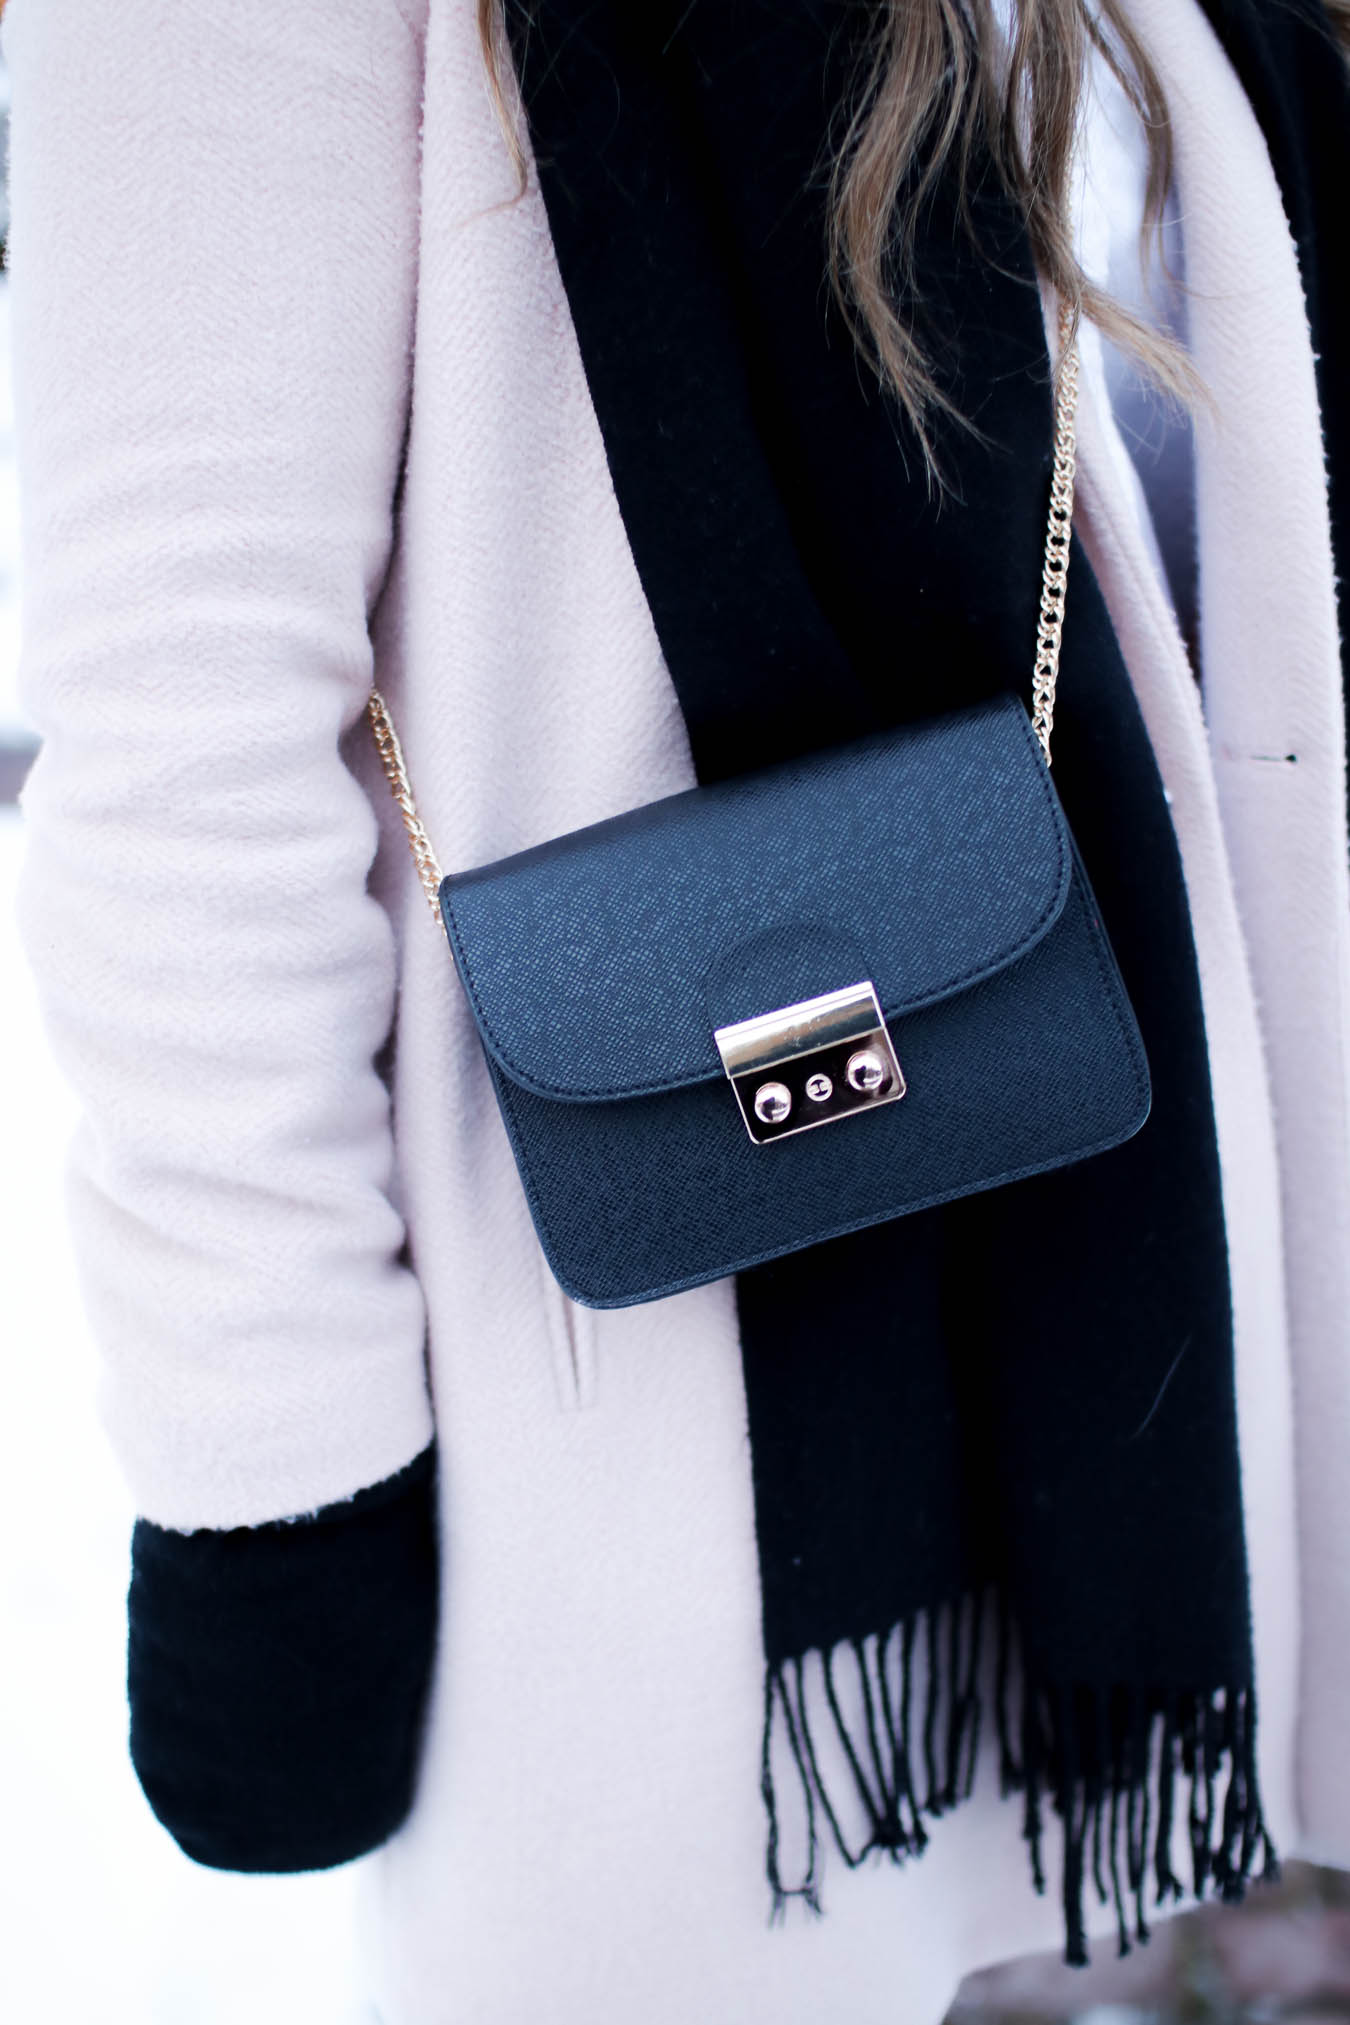 Pink-Black-Outfit-Ideas-Small-Crossbody-Bag-Chain-Strap | A Side Of Style